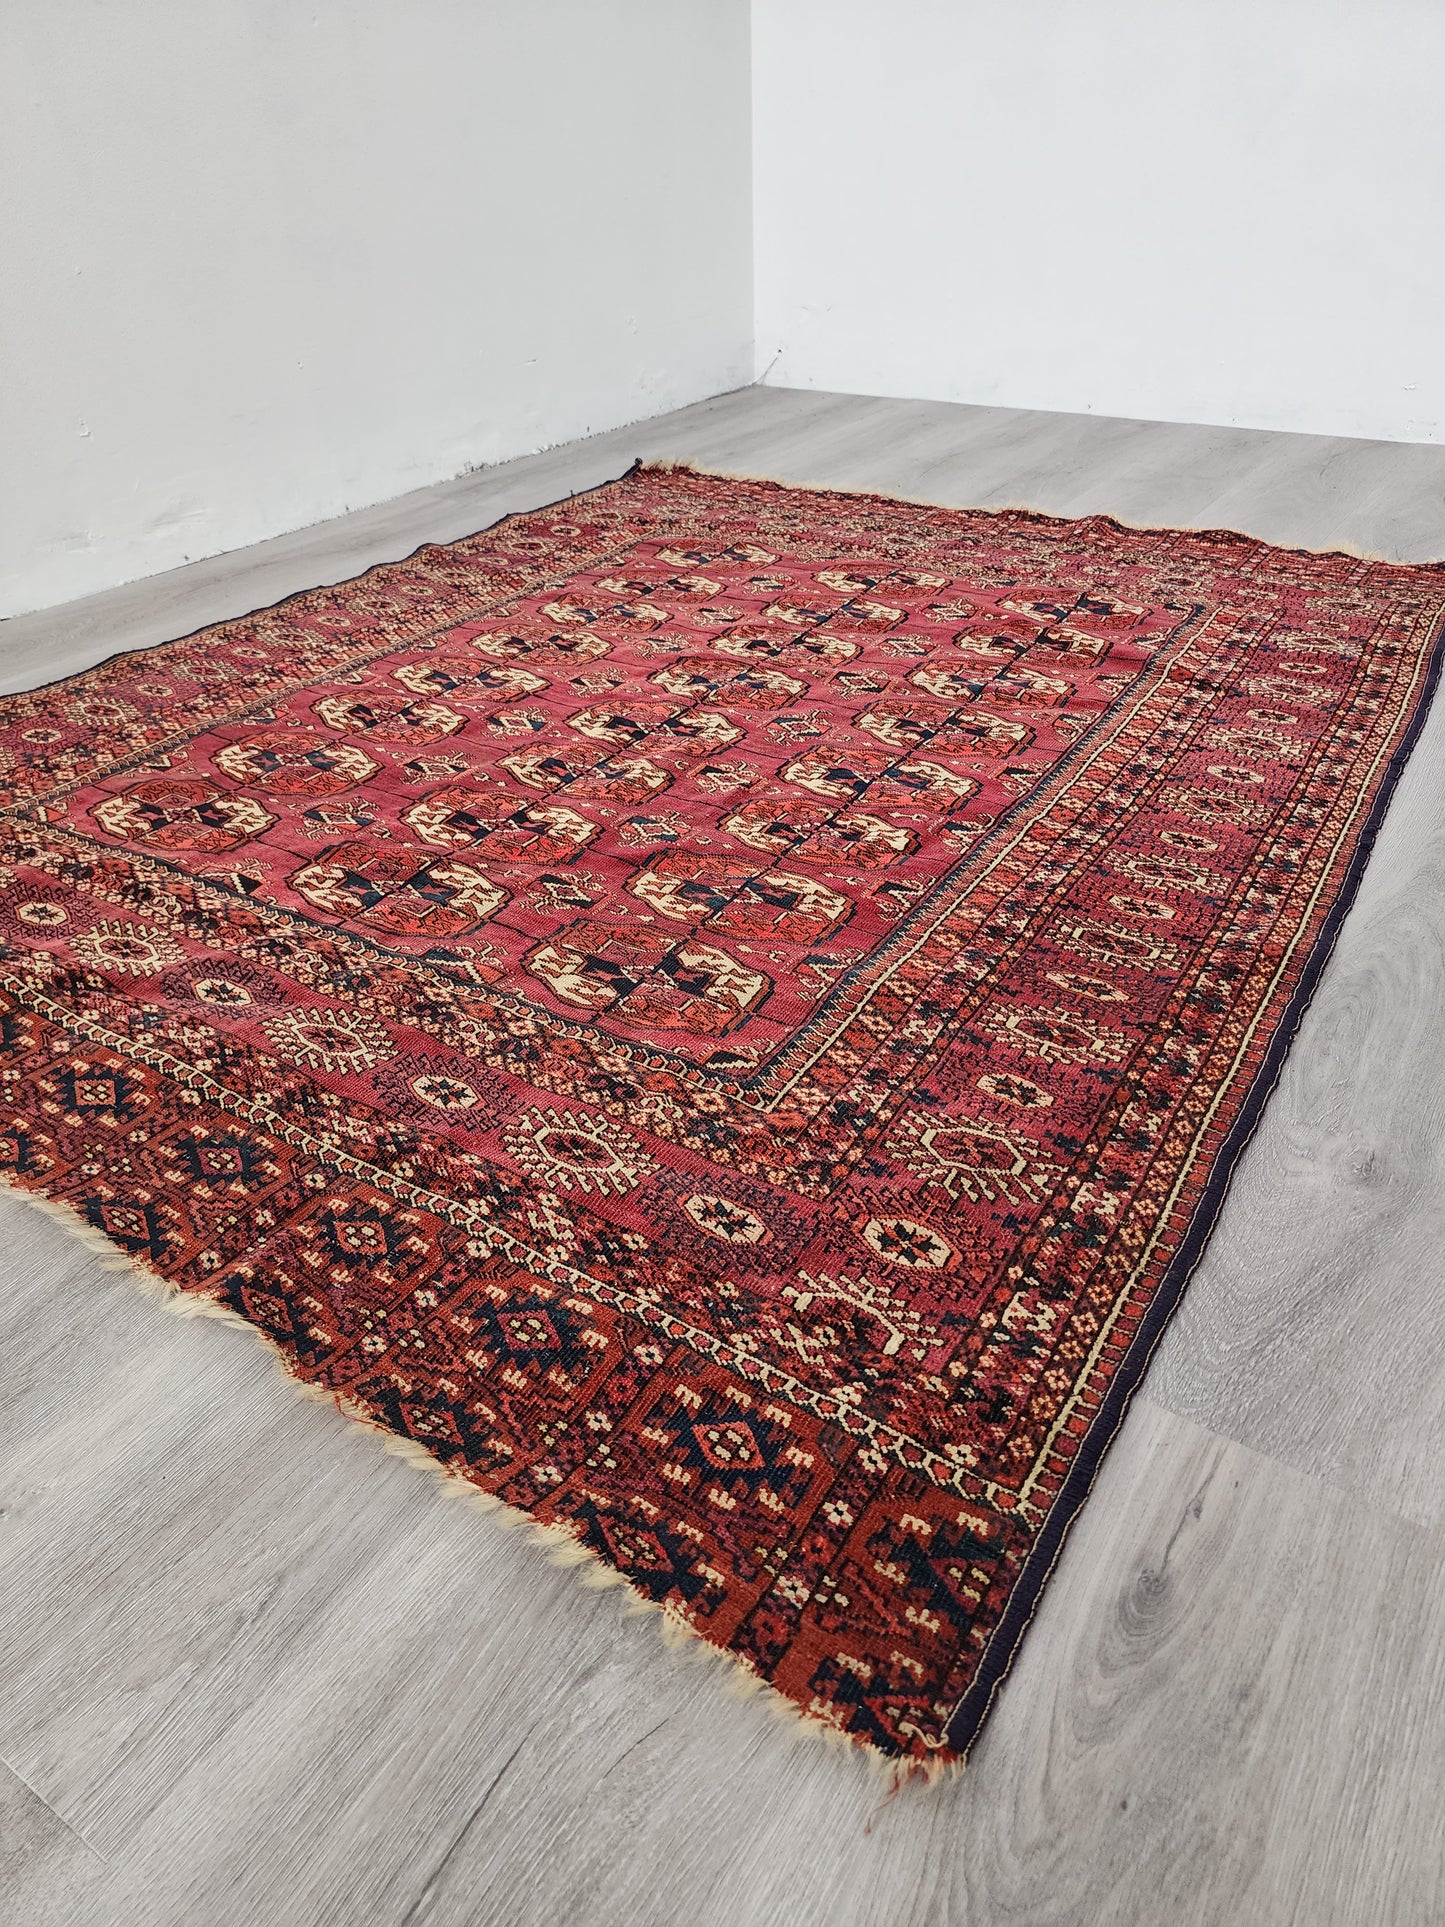 BB062302 Wool Bokhara Rug in Red